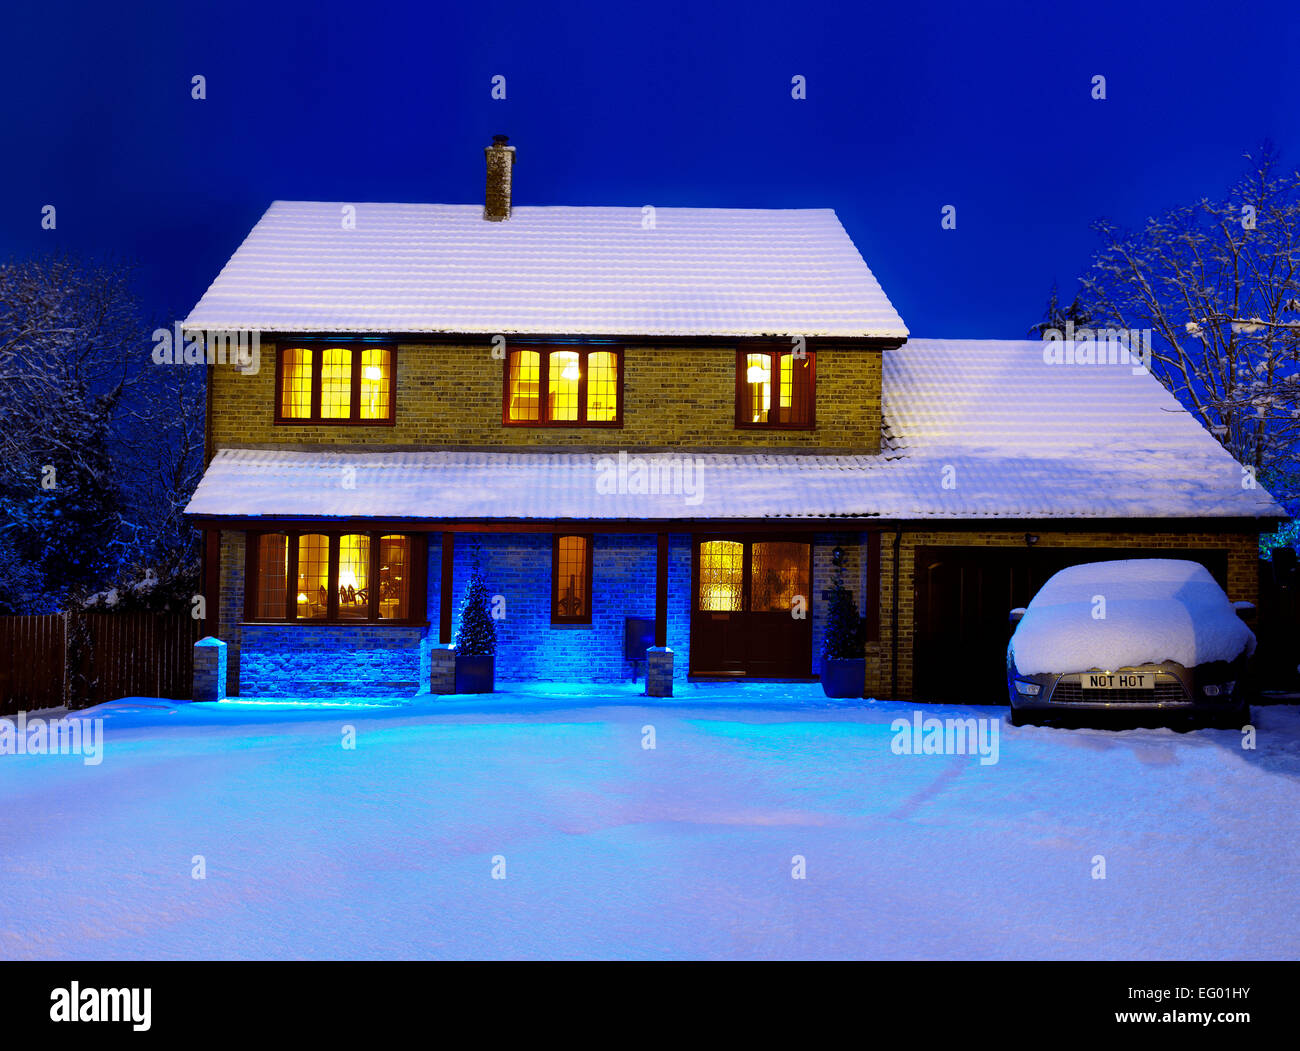 Night time image of large 4 5 bedroom executive style detached house winter exterior covered in snow Kent UK Stock Photo